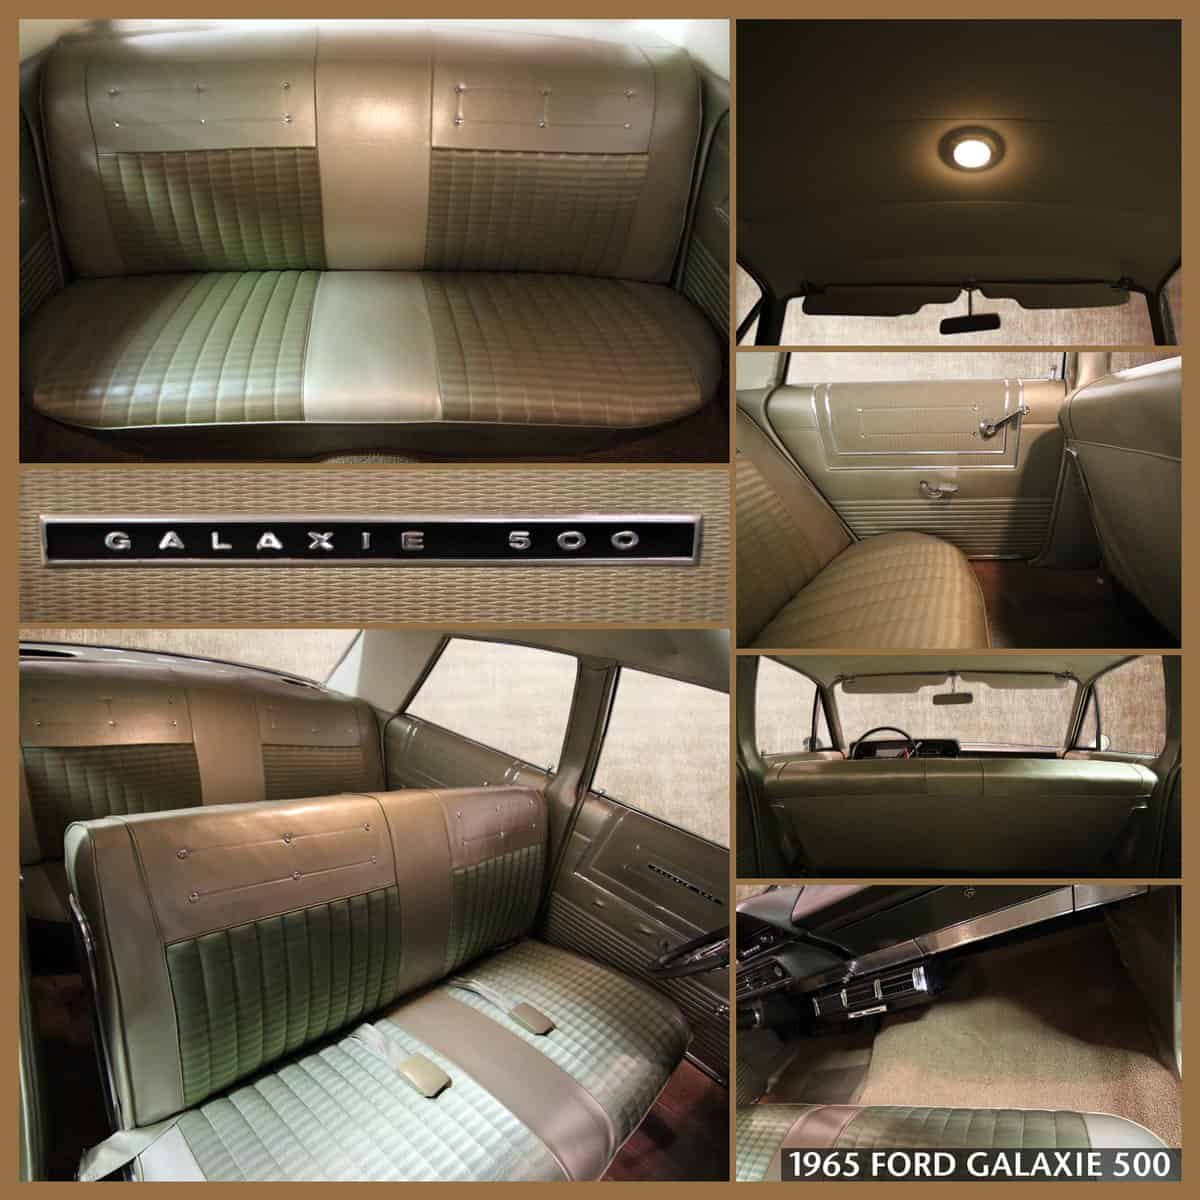 Automobile Upholstery Restoration / Vehicle Upholstery Renovation - 1965 Ford Galaxie 500